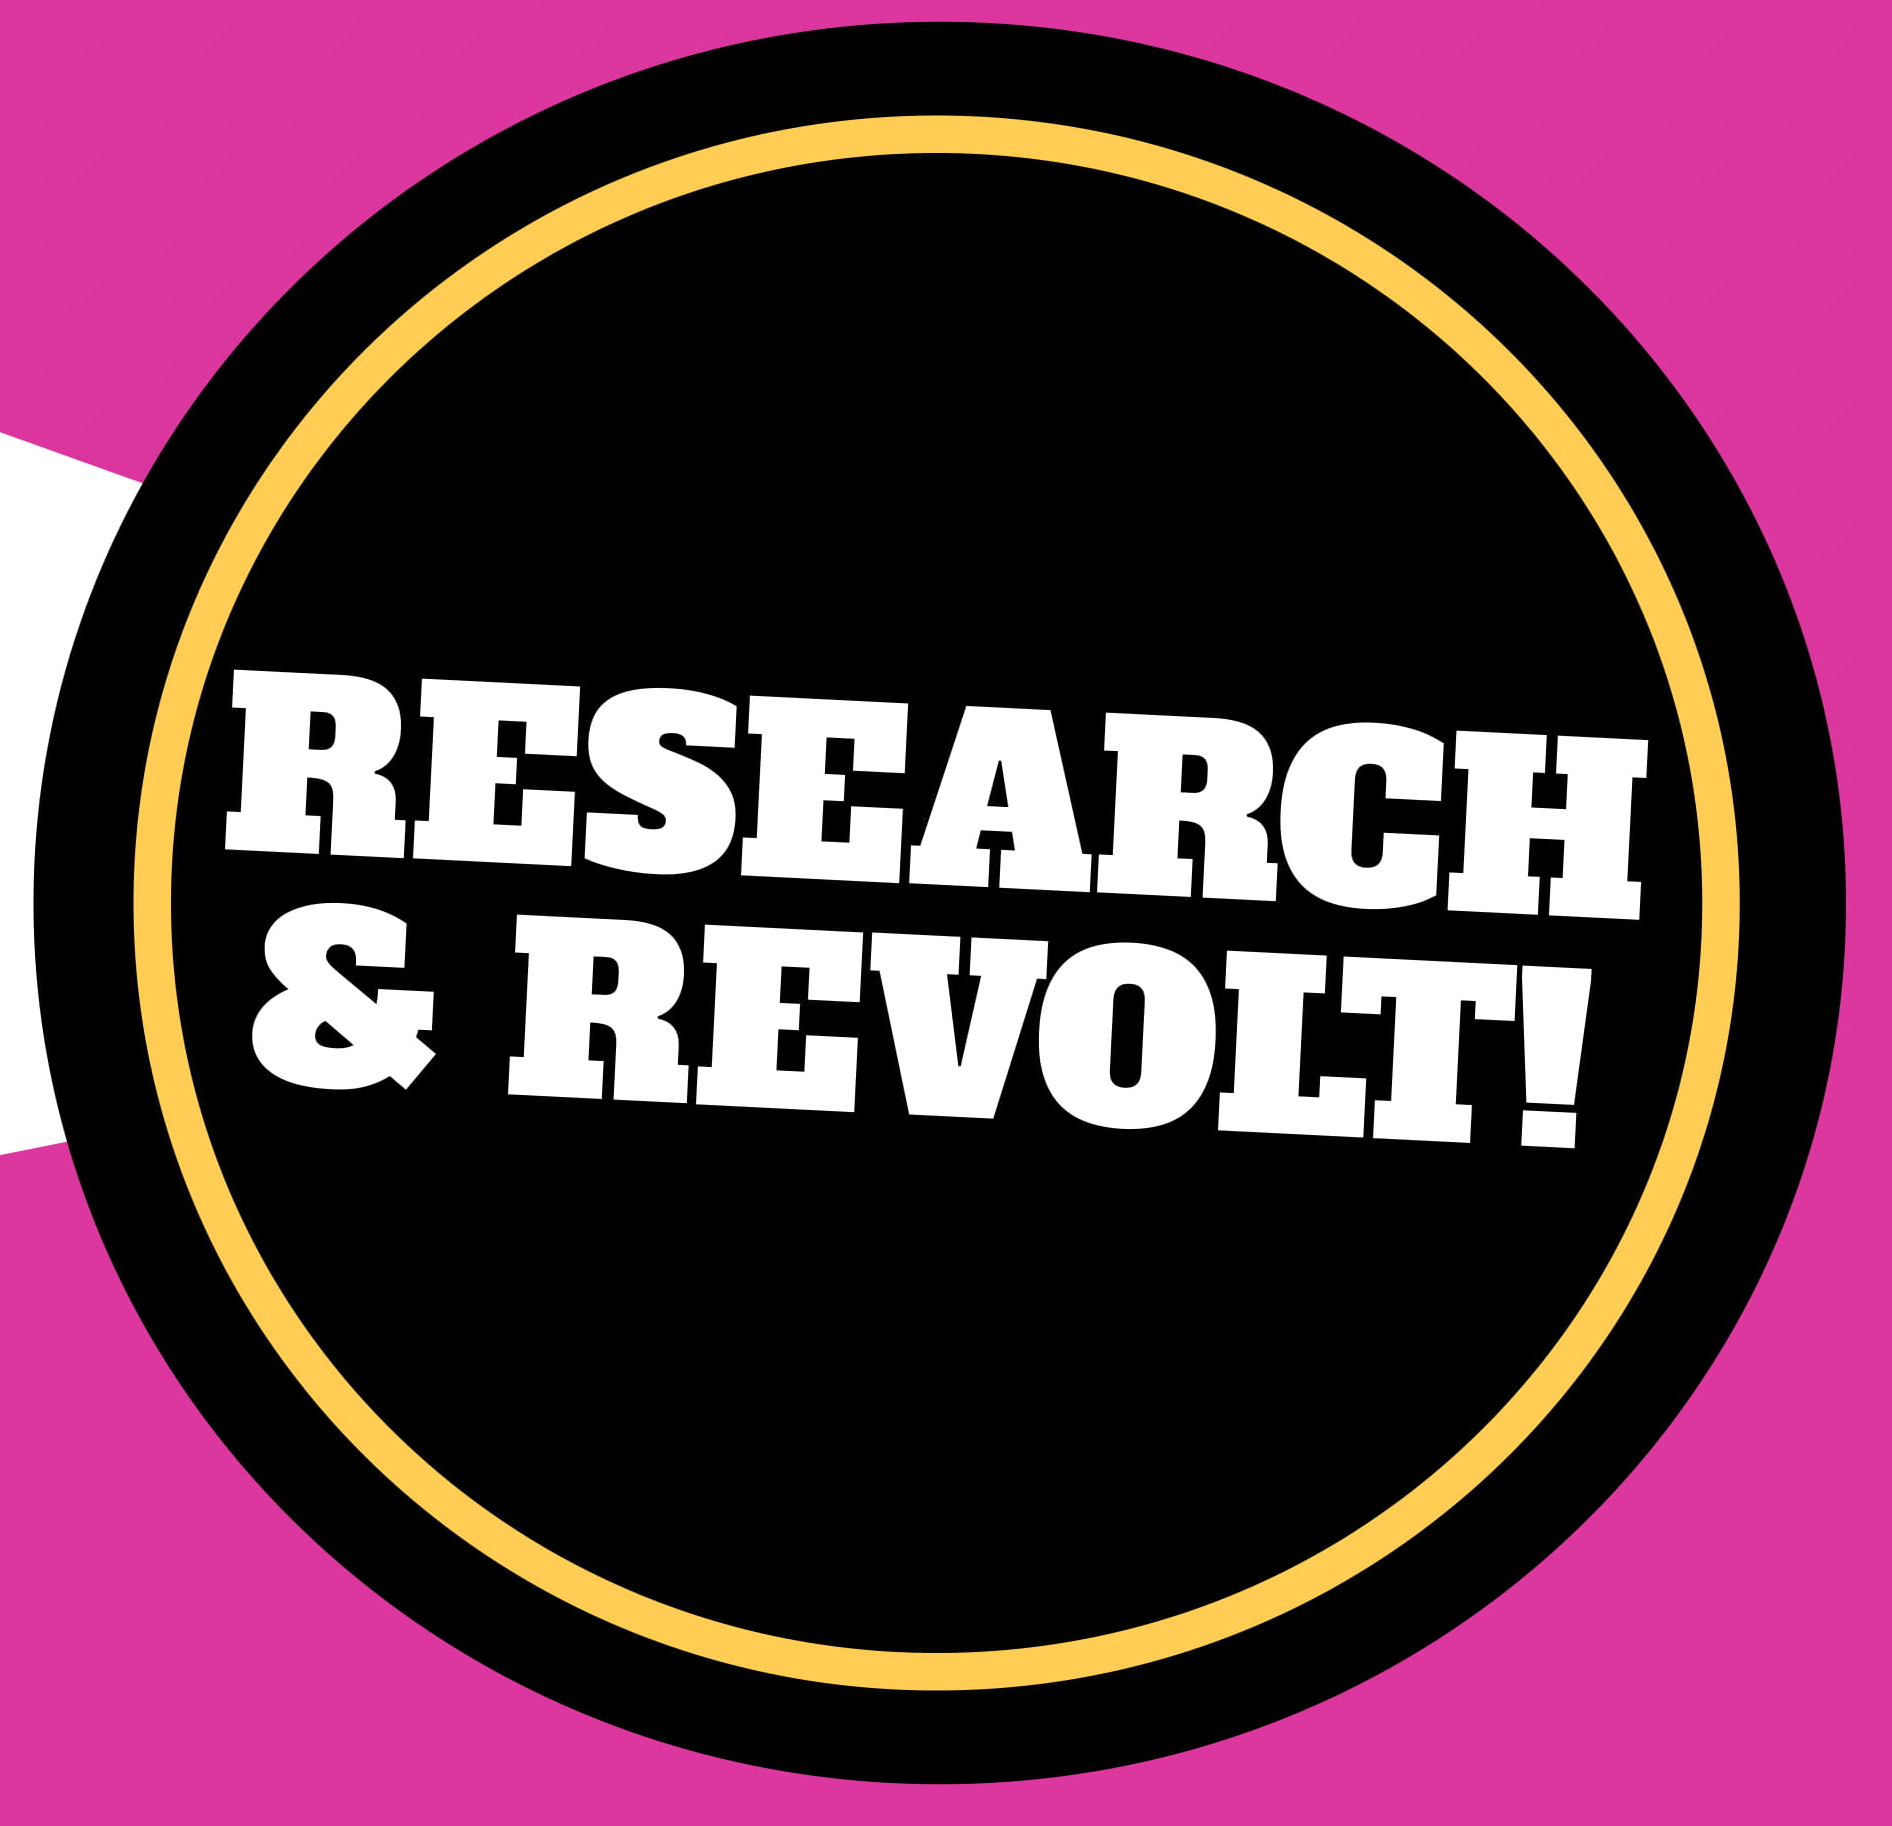 Call for Abstracts International Women’s Day Research and Revolt